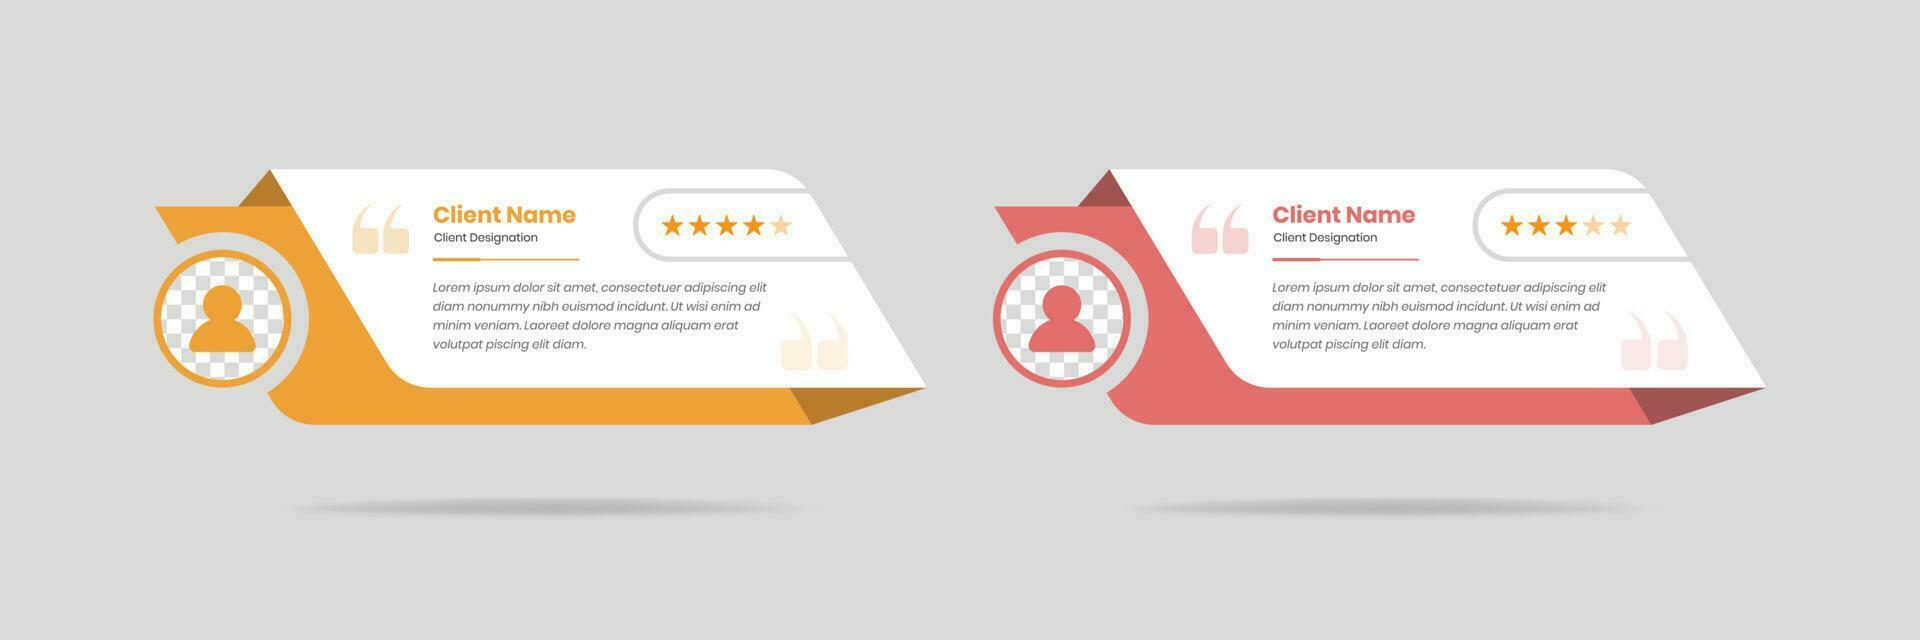 Minimalist client feedback or customer review template design element for a website vector